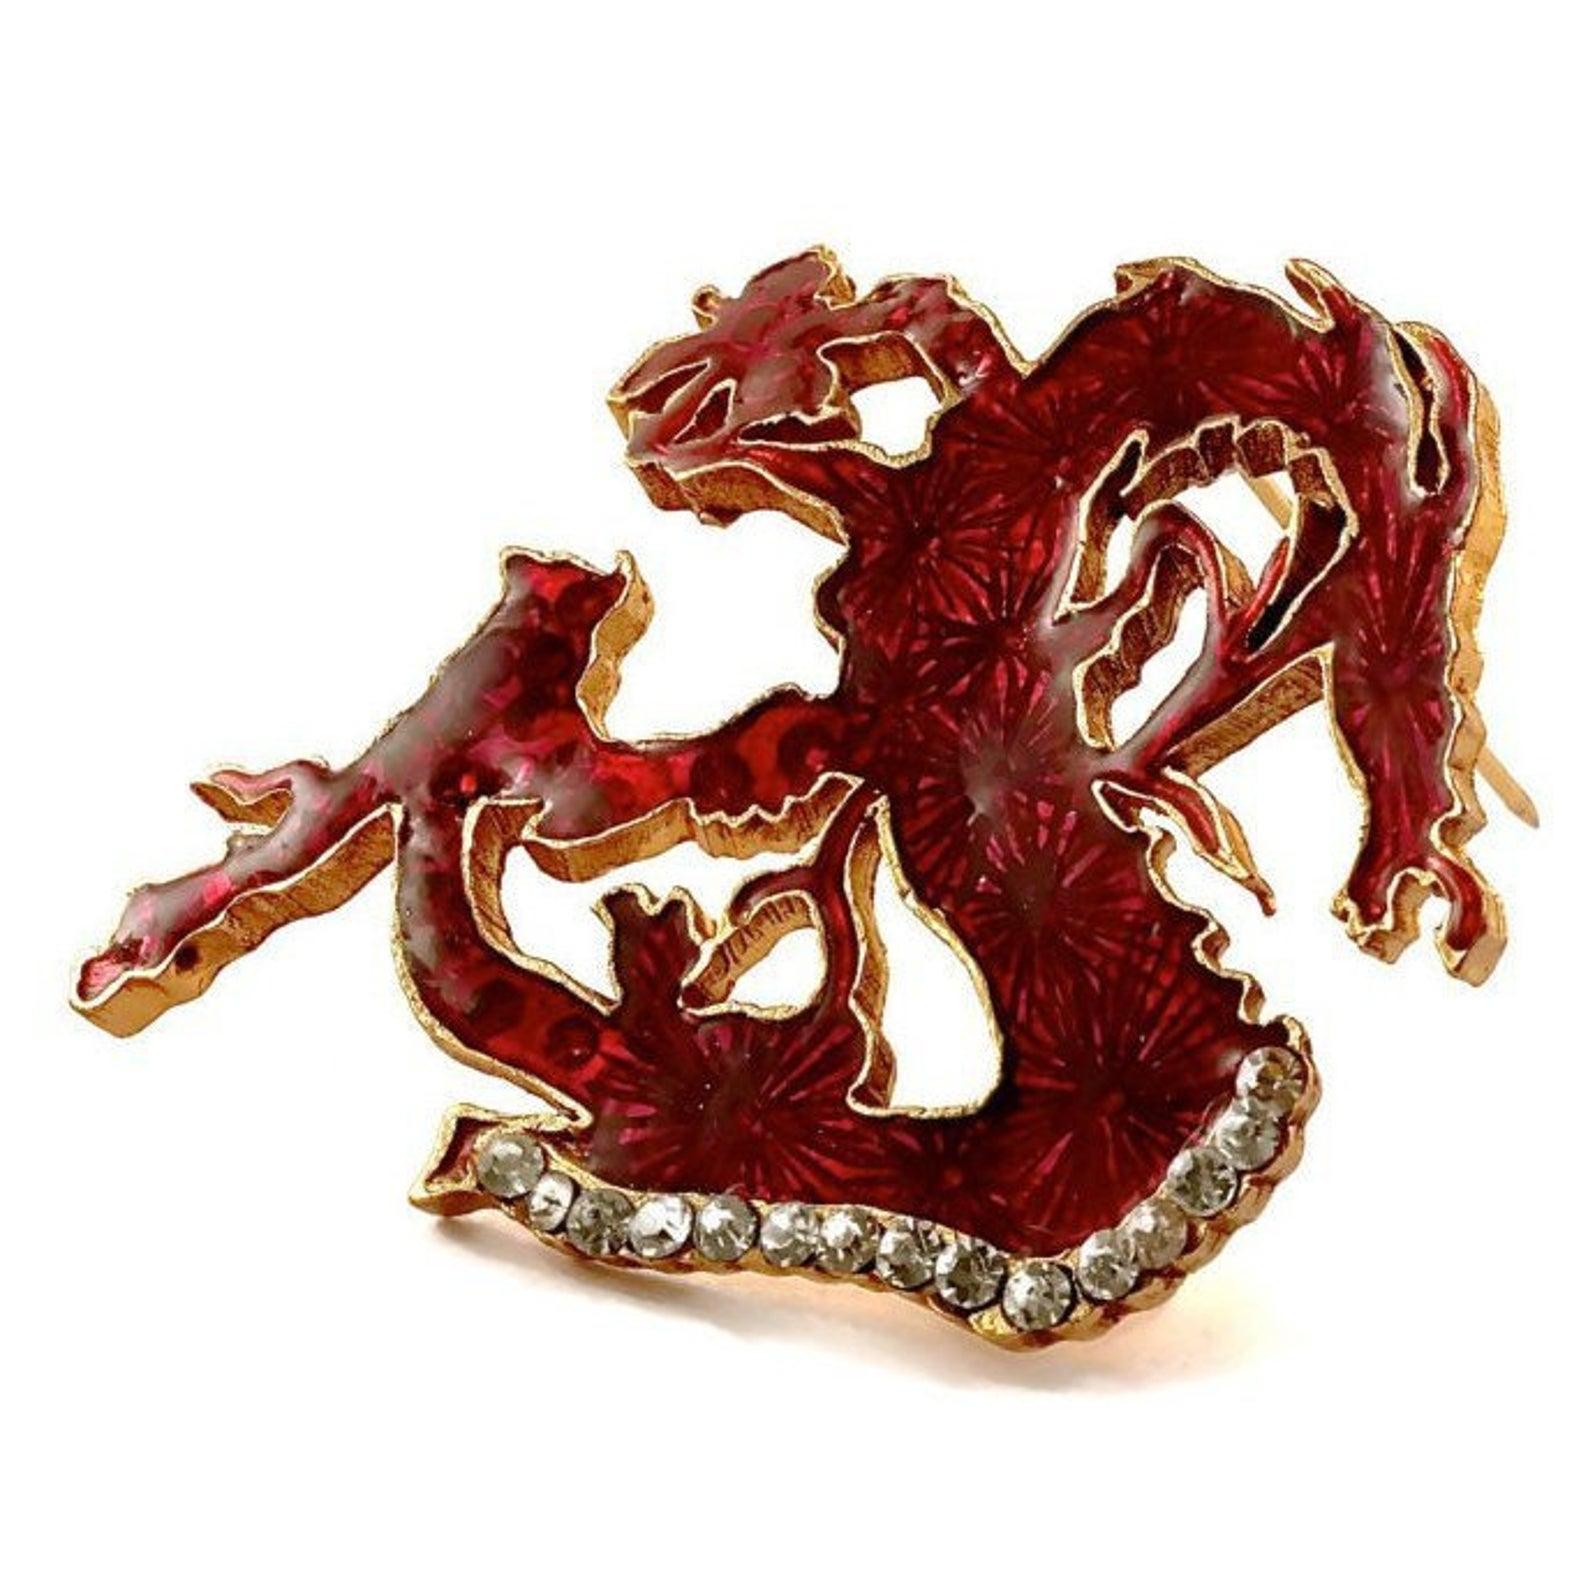 Vintage CHRISTIAN LACROIX Red Dragon Iridescent Enamel Rhinestone Brooch

Measurements:
Height: 2 4/8 inches (6.35 cm)
Width: 2 2/8 inches (5.71 cm)

Features:
- 100% Authentic CHRISTIAN LACROIX.
- Red dragon in Iridescent enamel with embedded